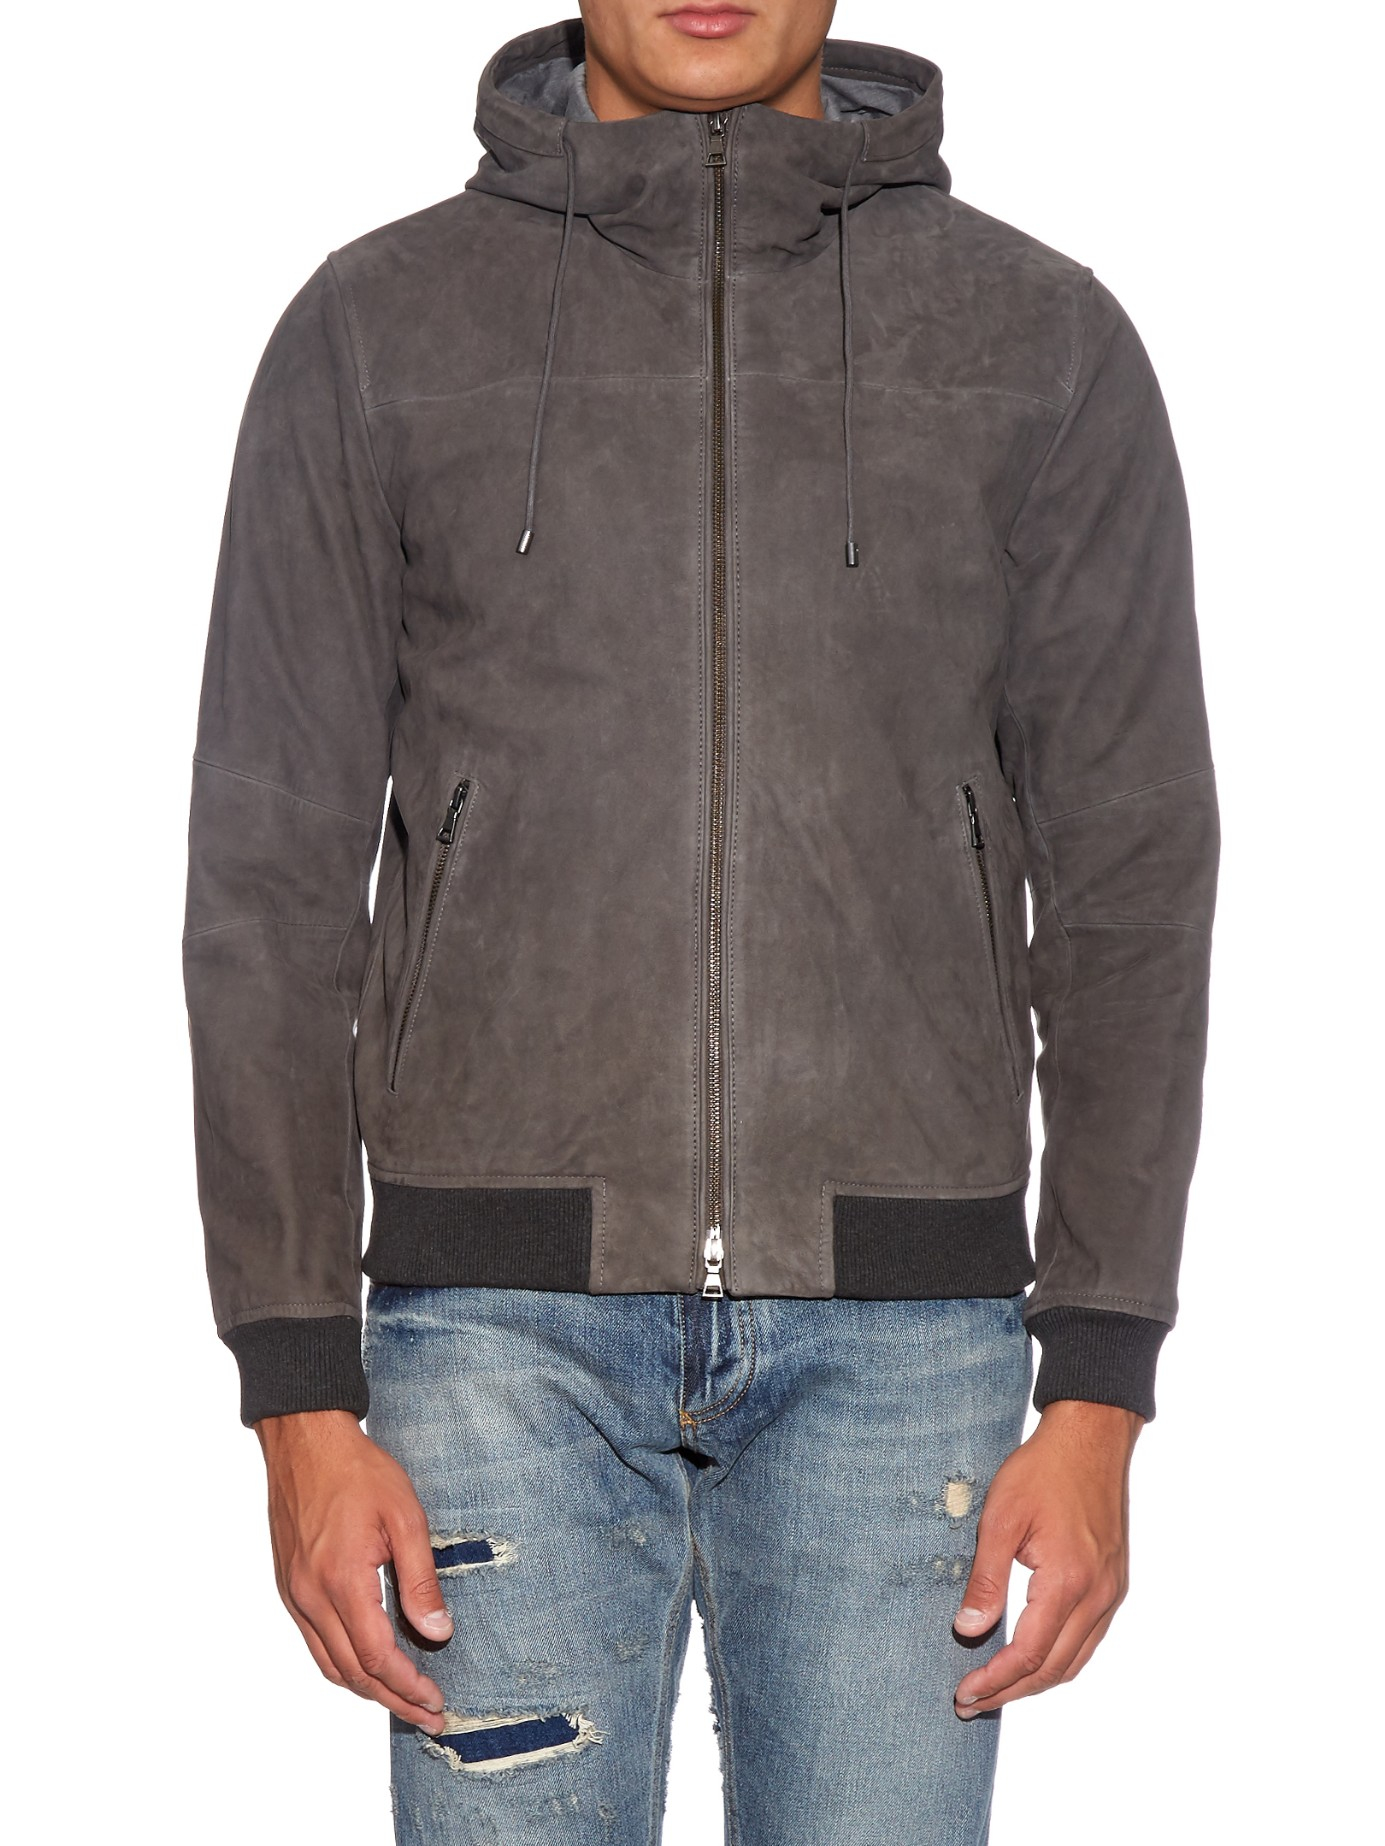 Vince Hooded Suede Jacket in Grey (Gray) for Men - Lyst